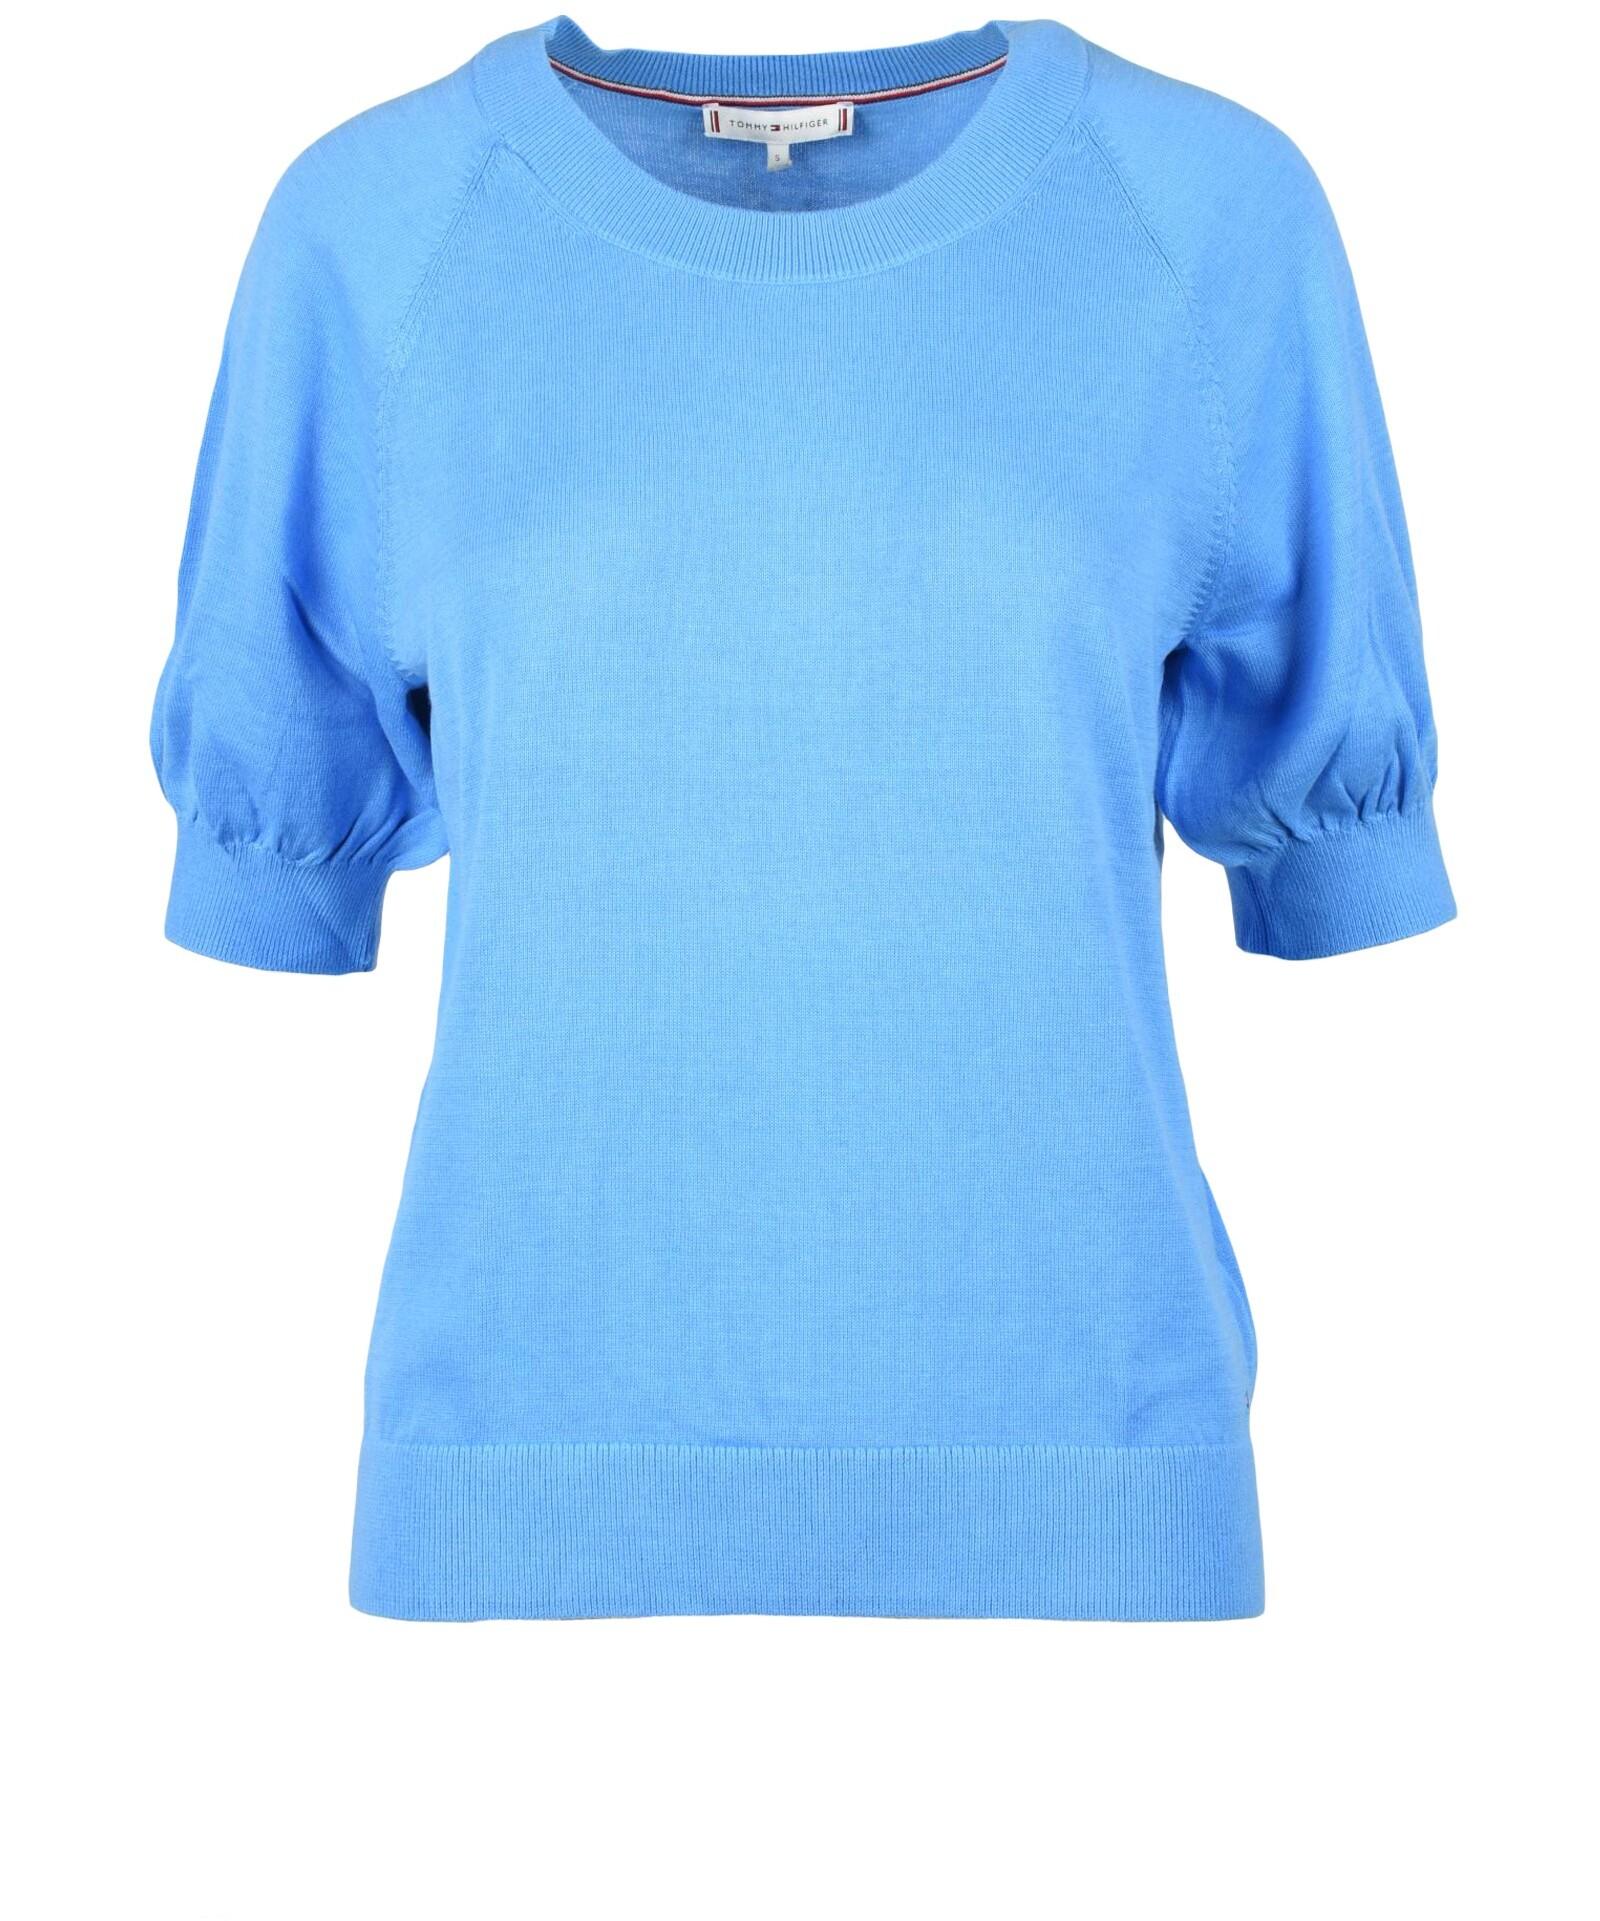 Tommy Hilfiger Women's Sky Blue Sweater at FORZIERI